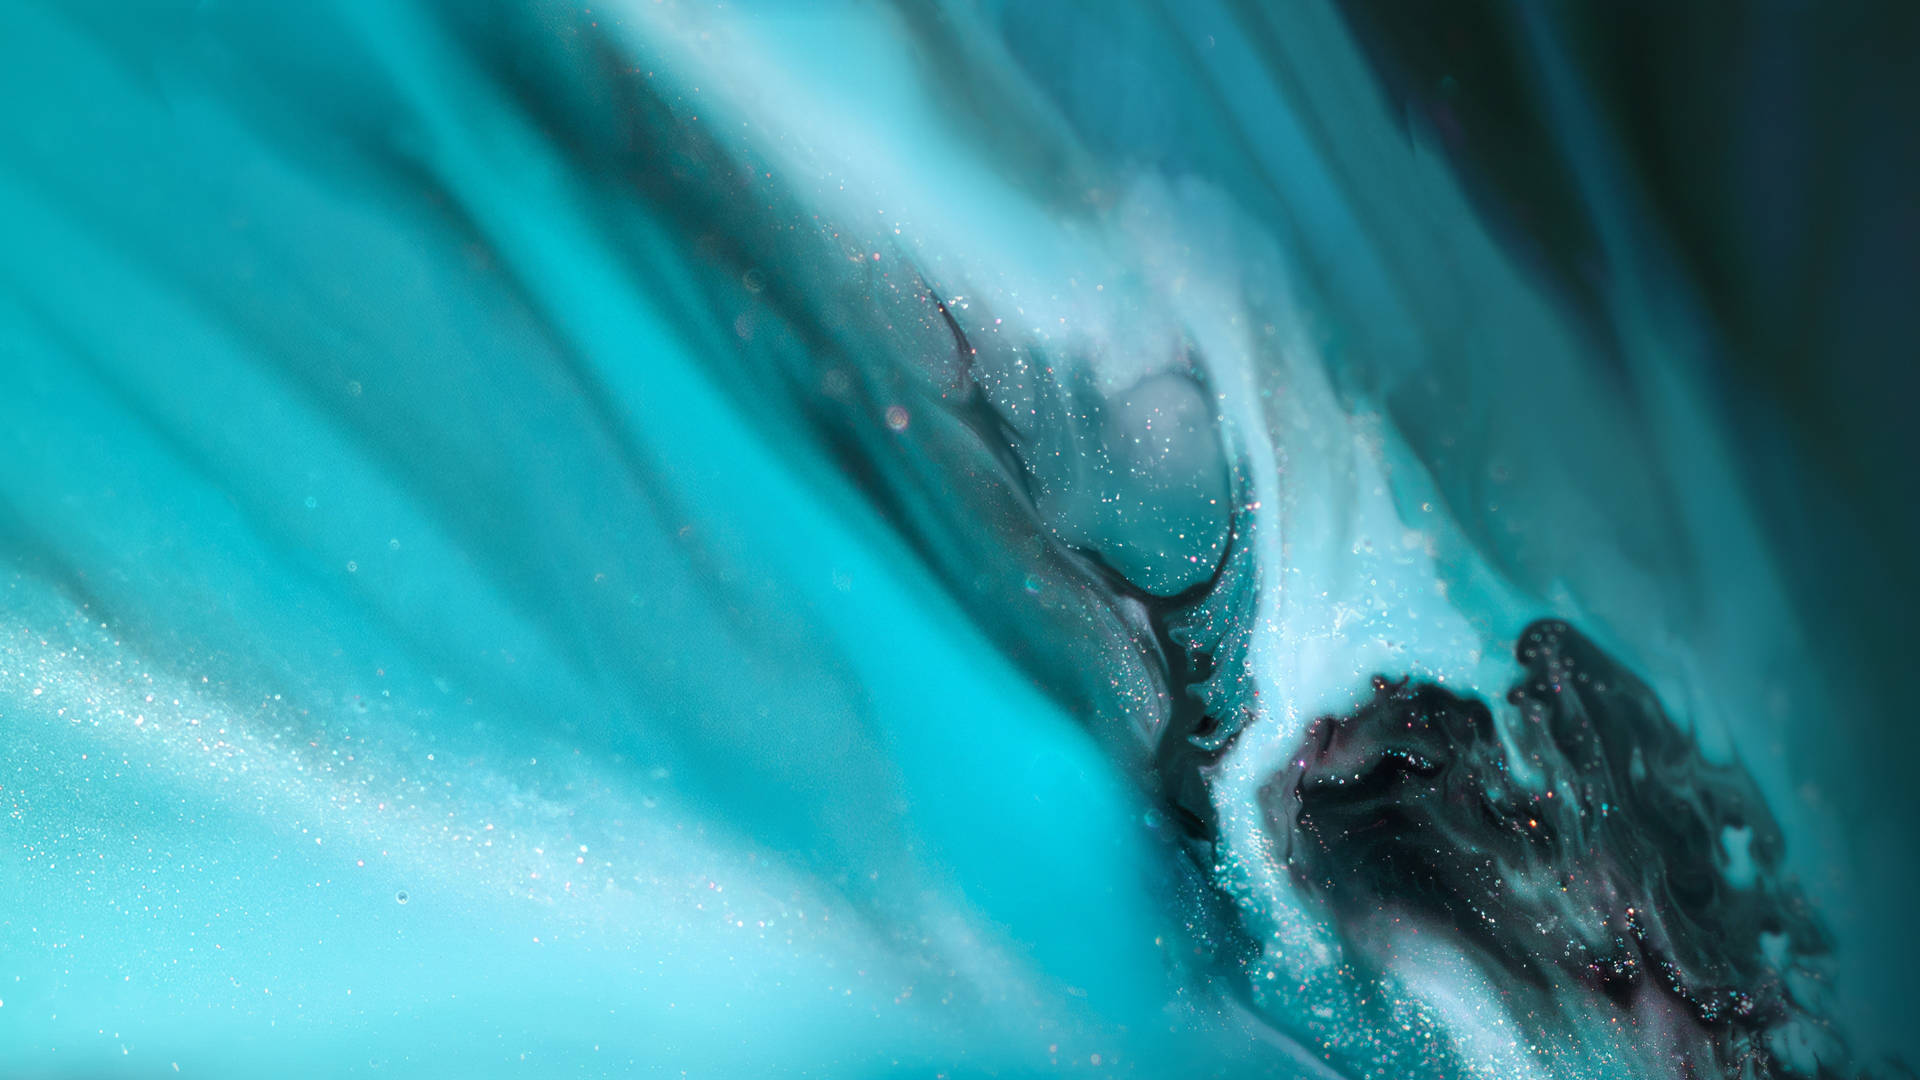 Teal Marble 4d Ultra Hd